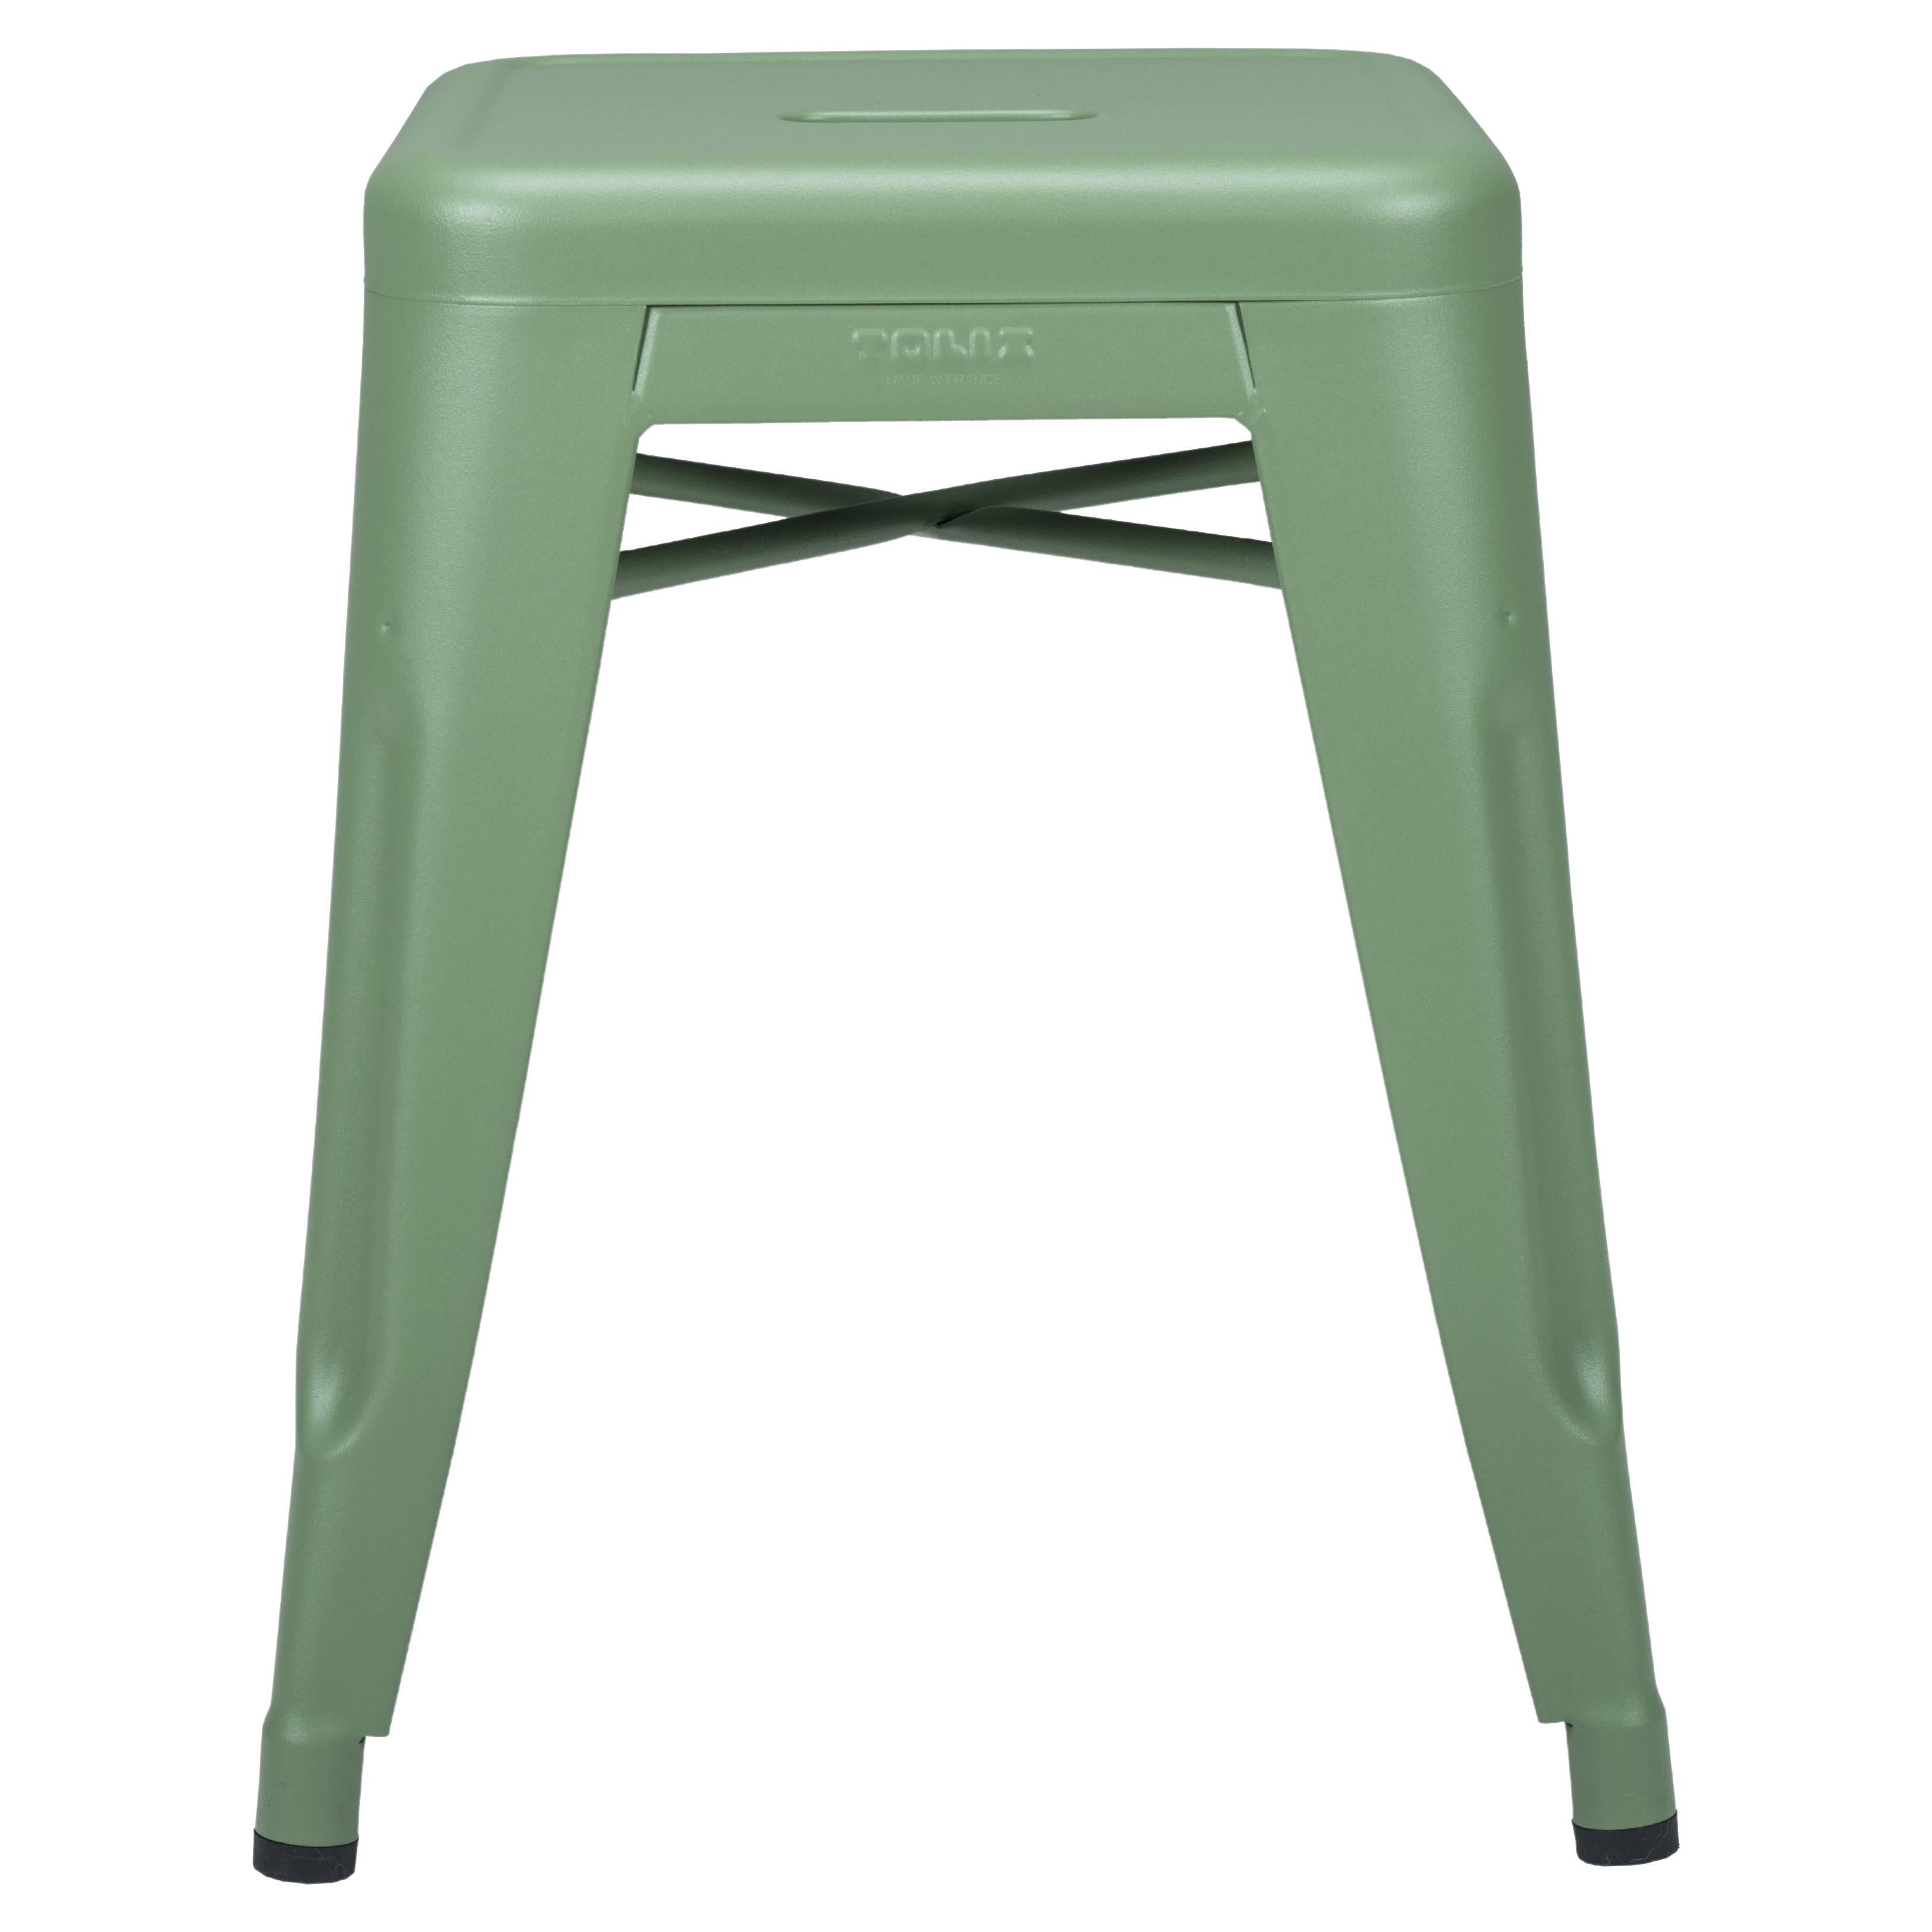 H Stool 45 in Anise Green by Chantal Andriot and Tolix